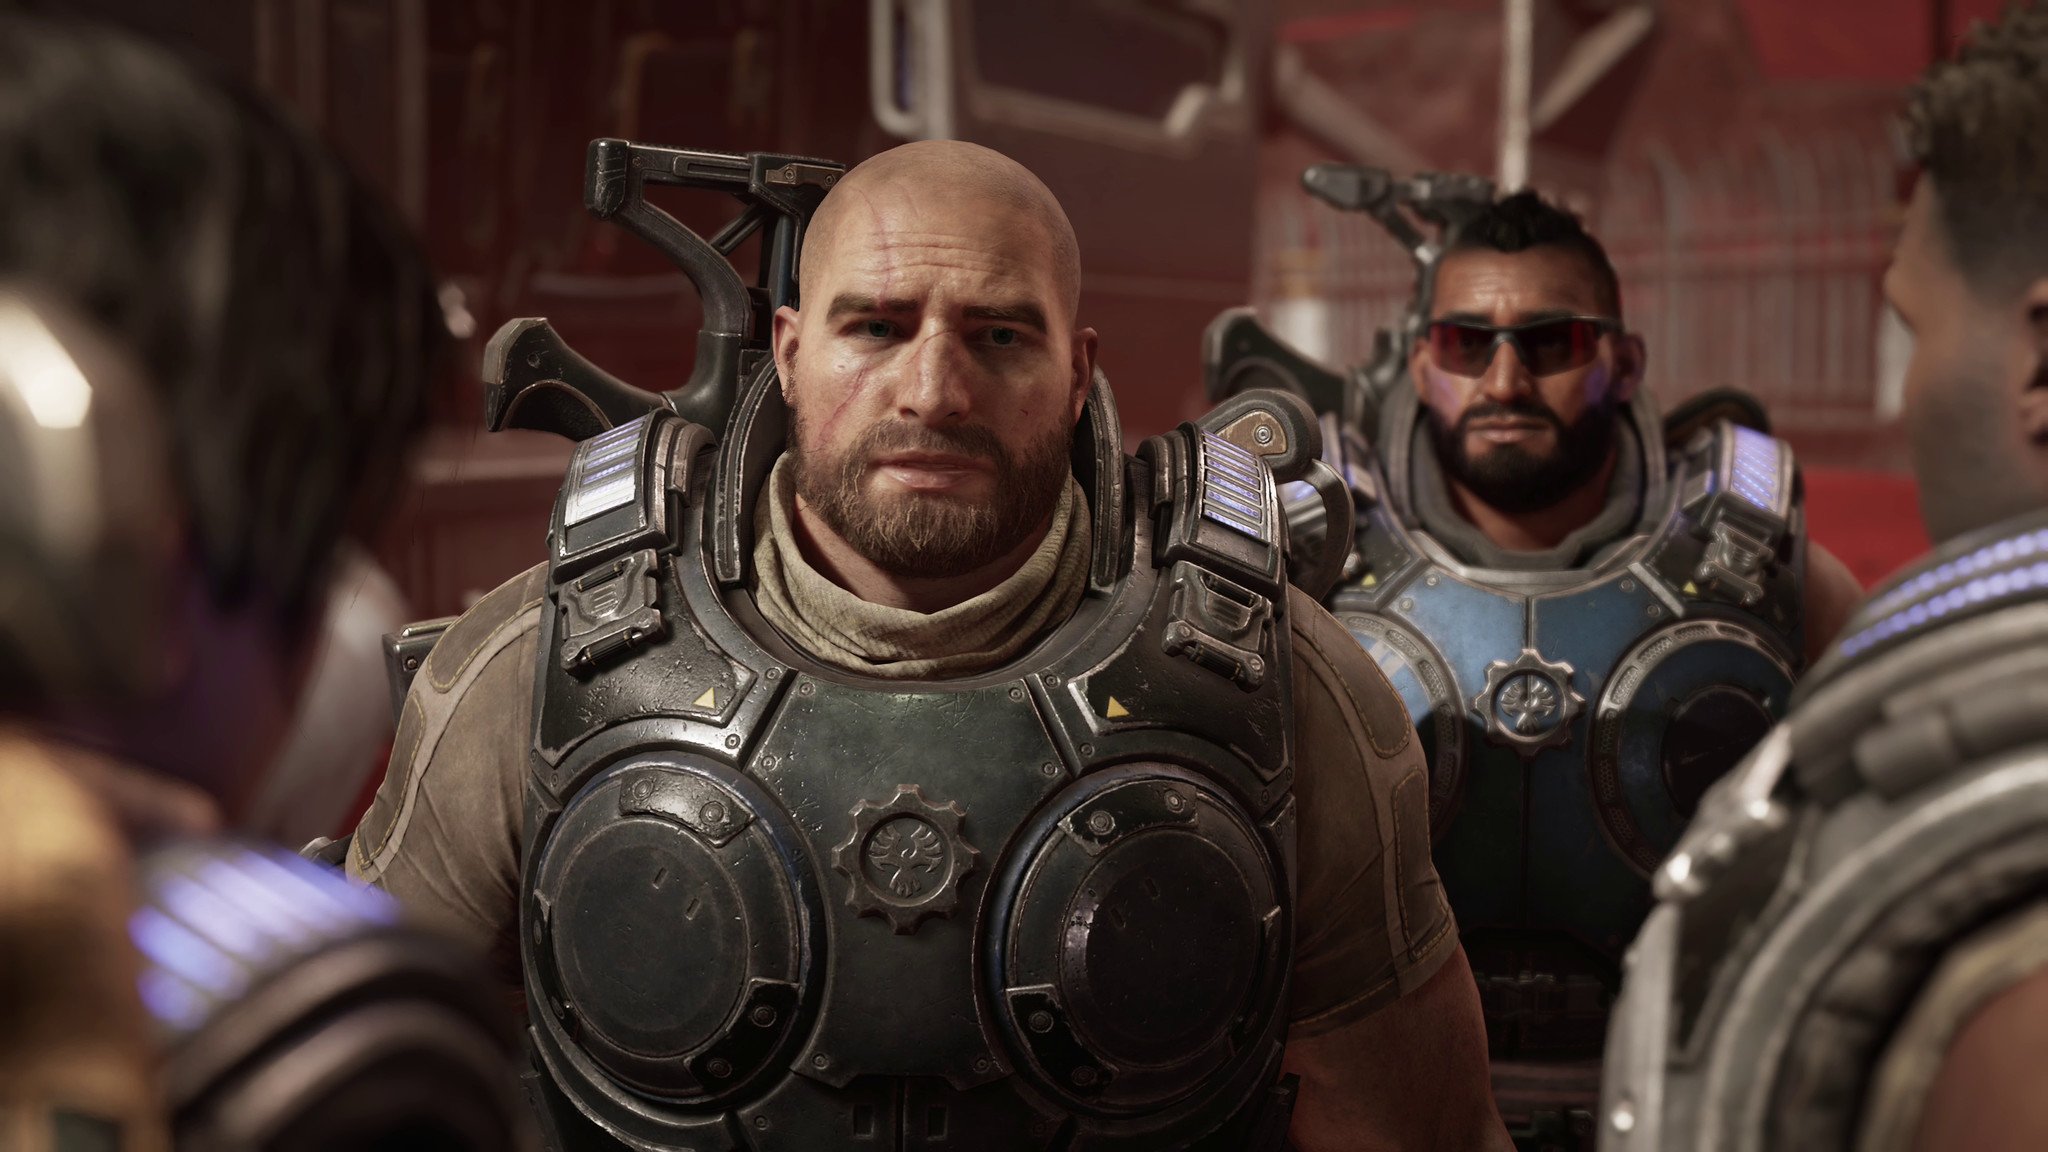 The max level cap in Gears 5 multiplayer